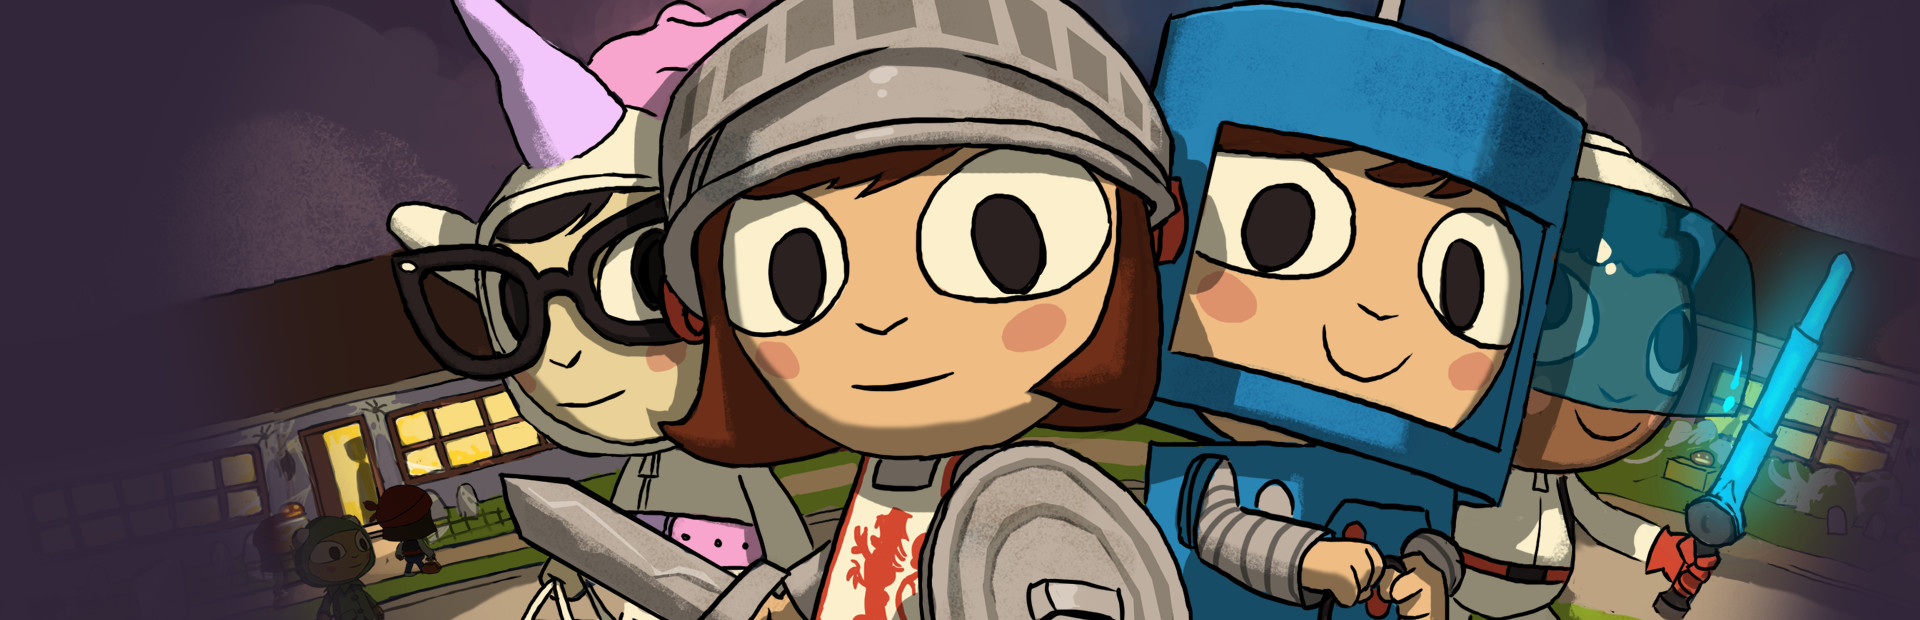 Costume Quest cover image